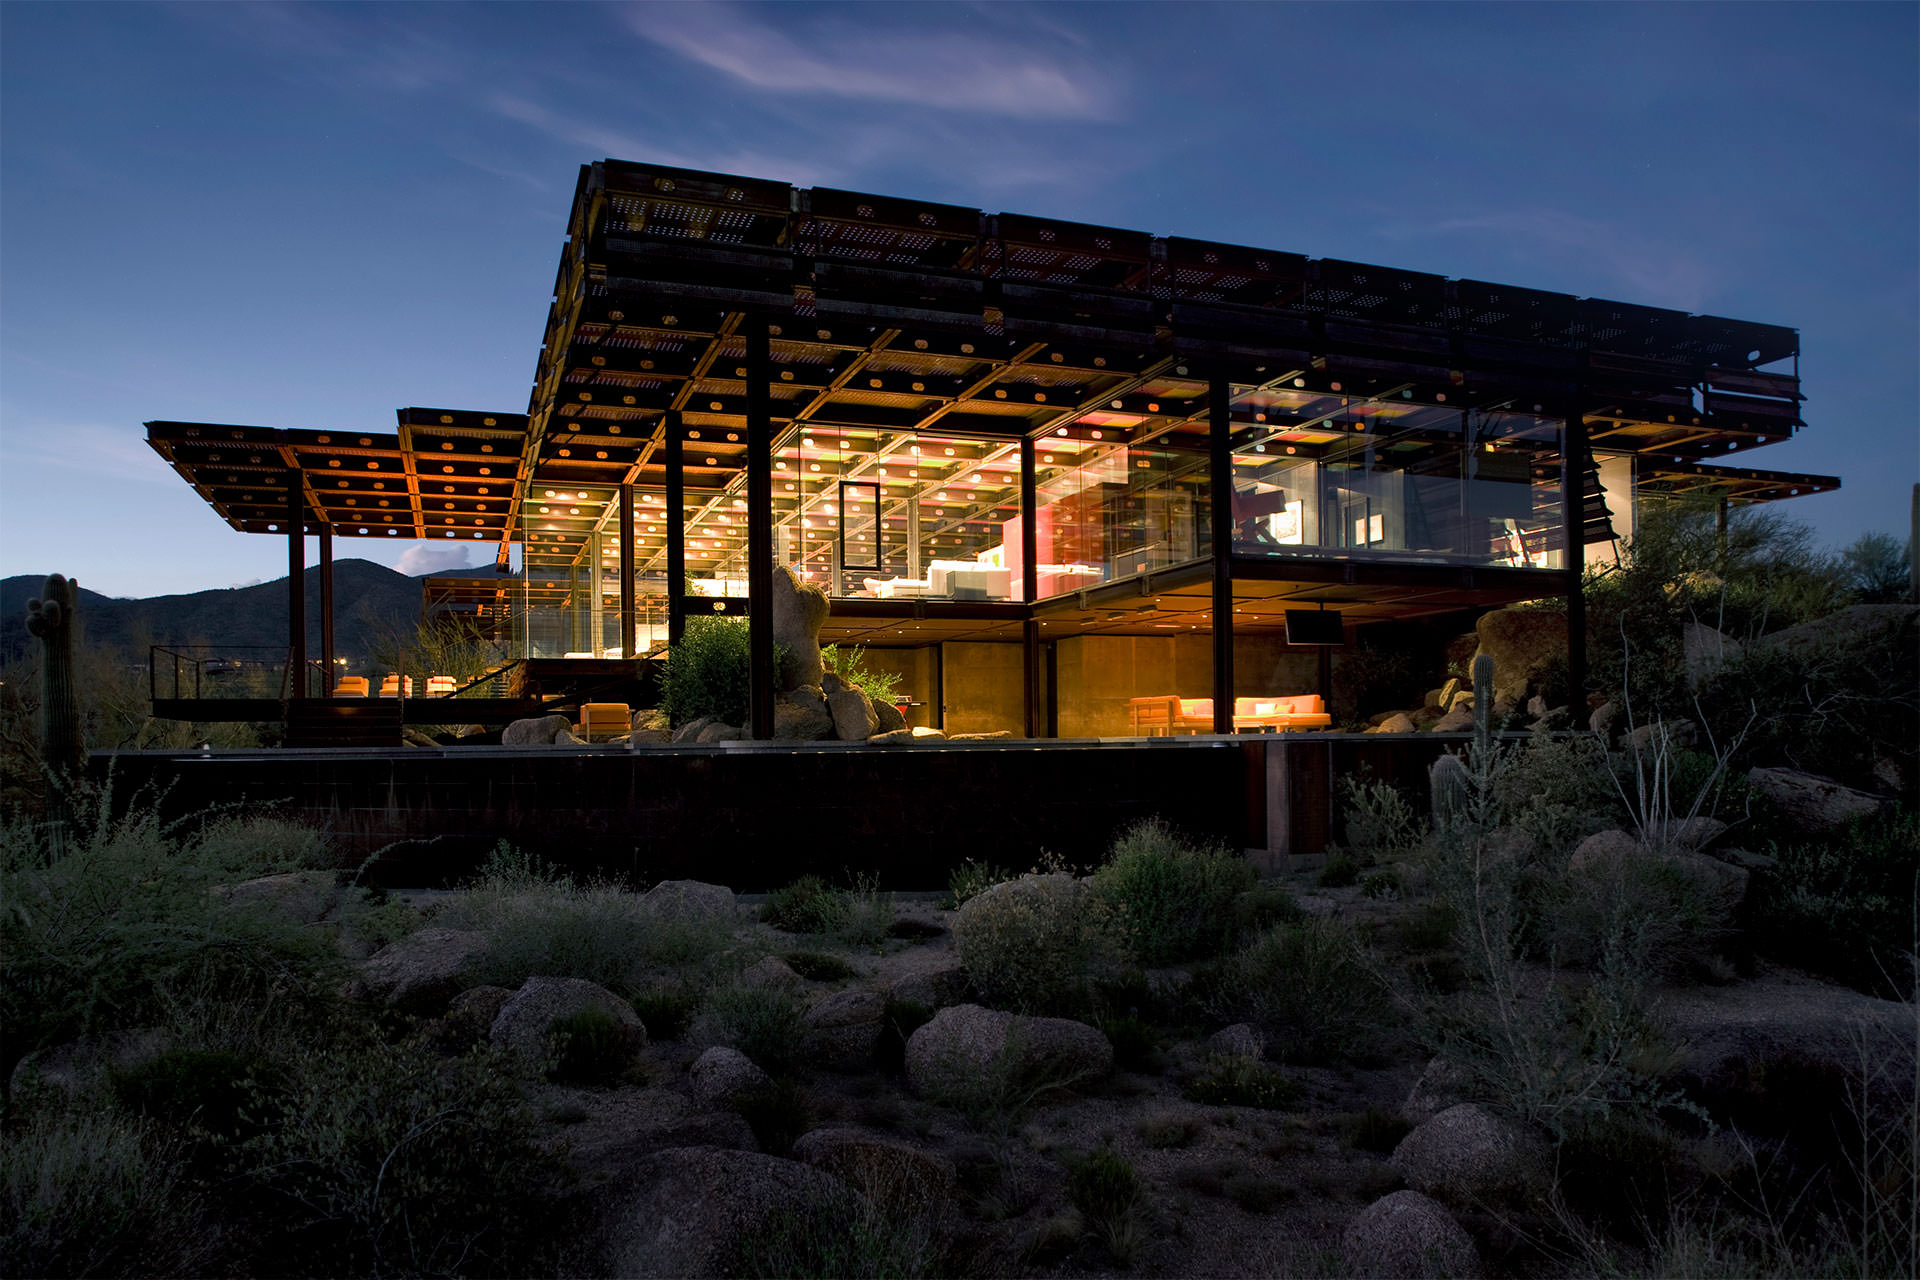 View of the house within the desert at night